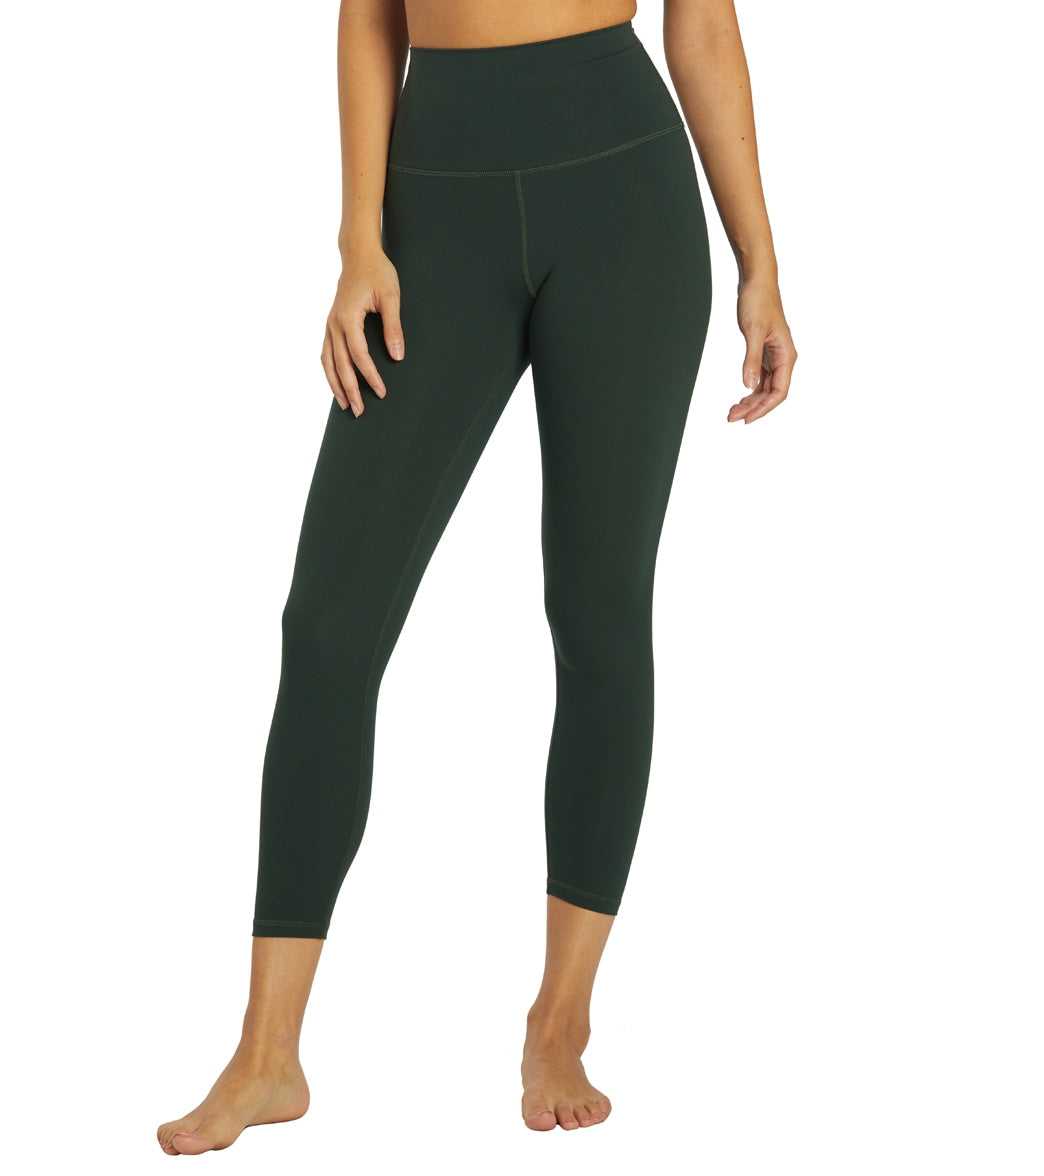 Glyder Pure 7/8 Yoga Leggings at YogaOutlet.com - Free Shipping –